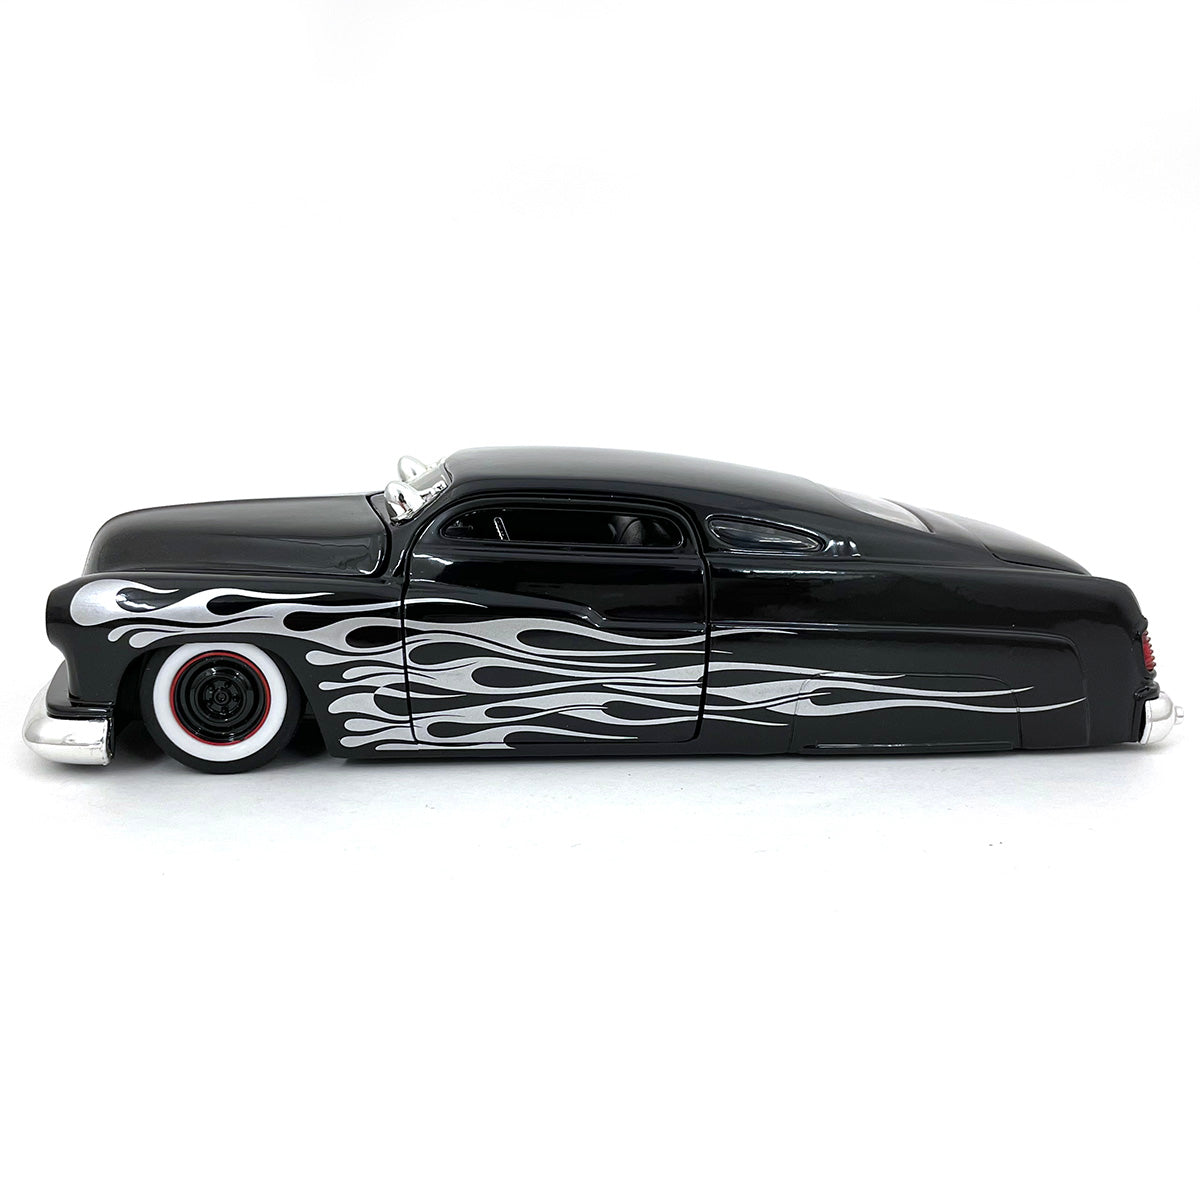 Bigtime Kustoms 1951 Mercury Coupe Low Rider 1:24 Scale Diecast